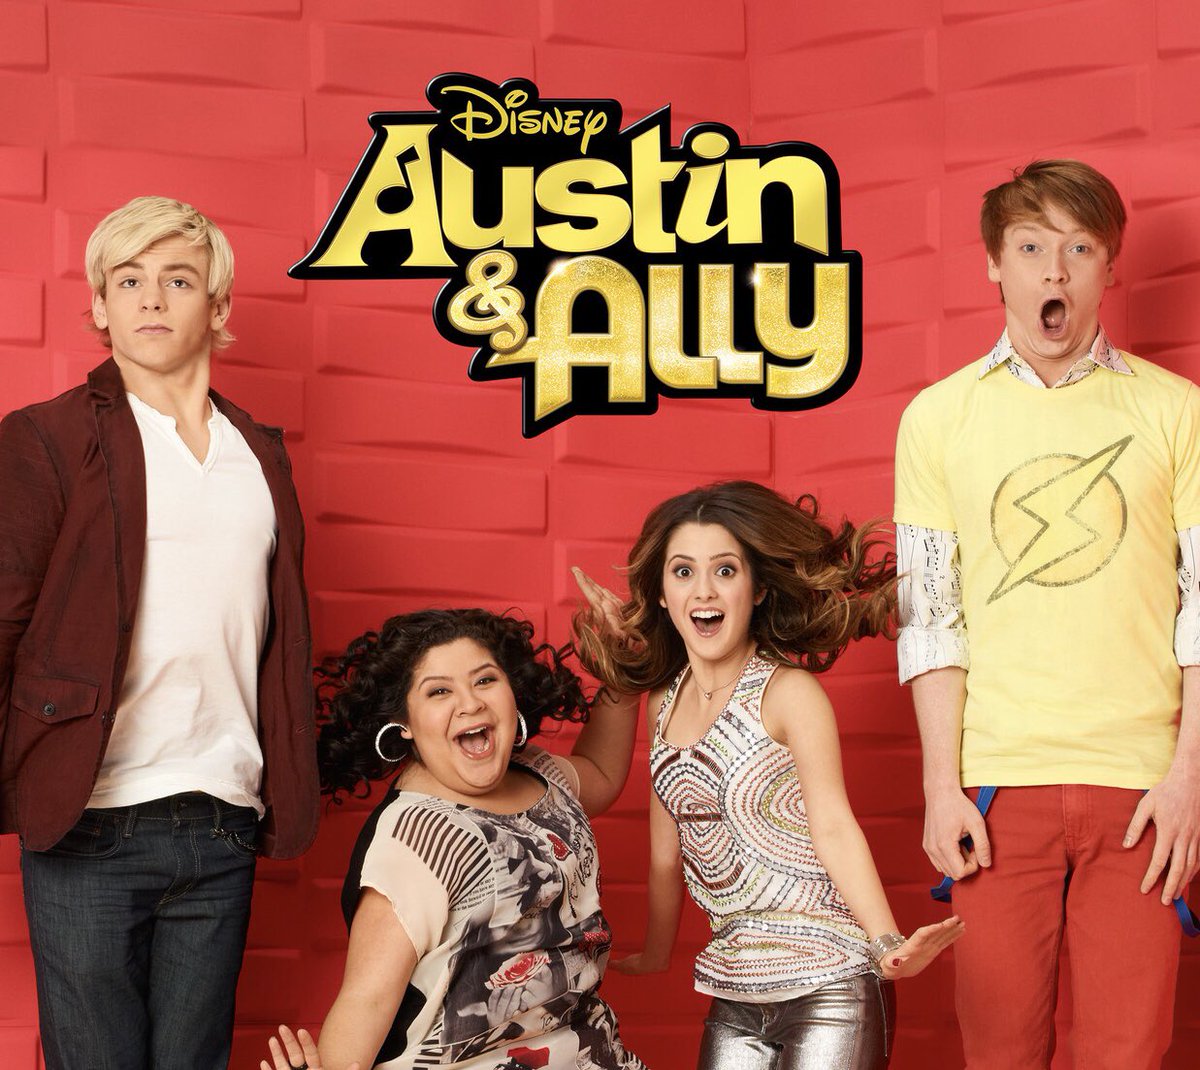 Vote On The Throwback Disney Channel Show You Want Rebooted Next